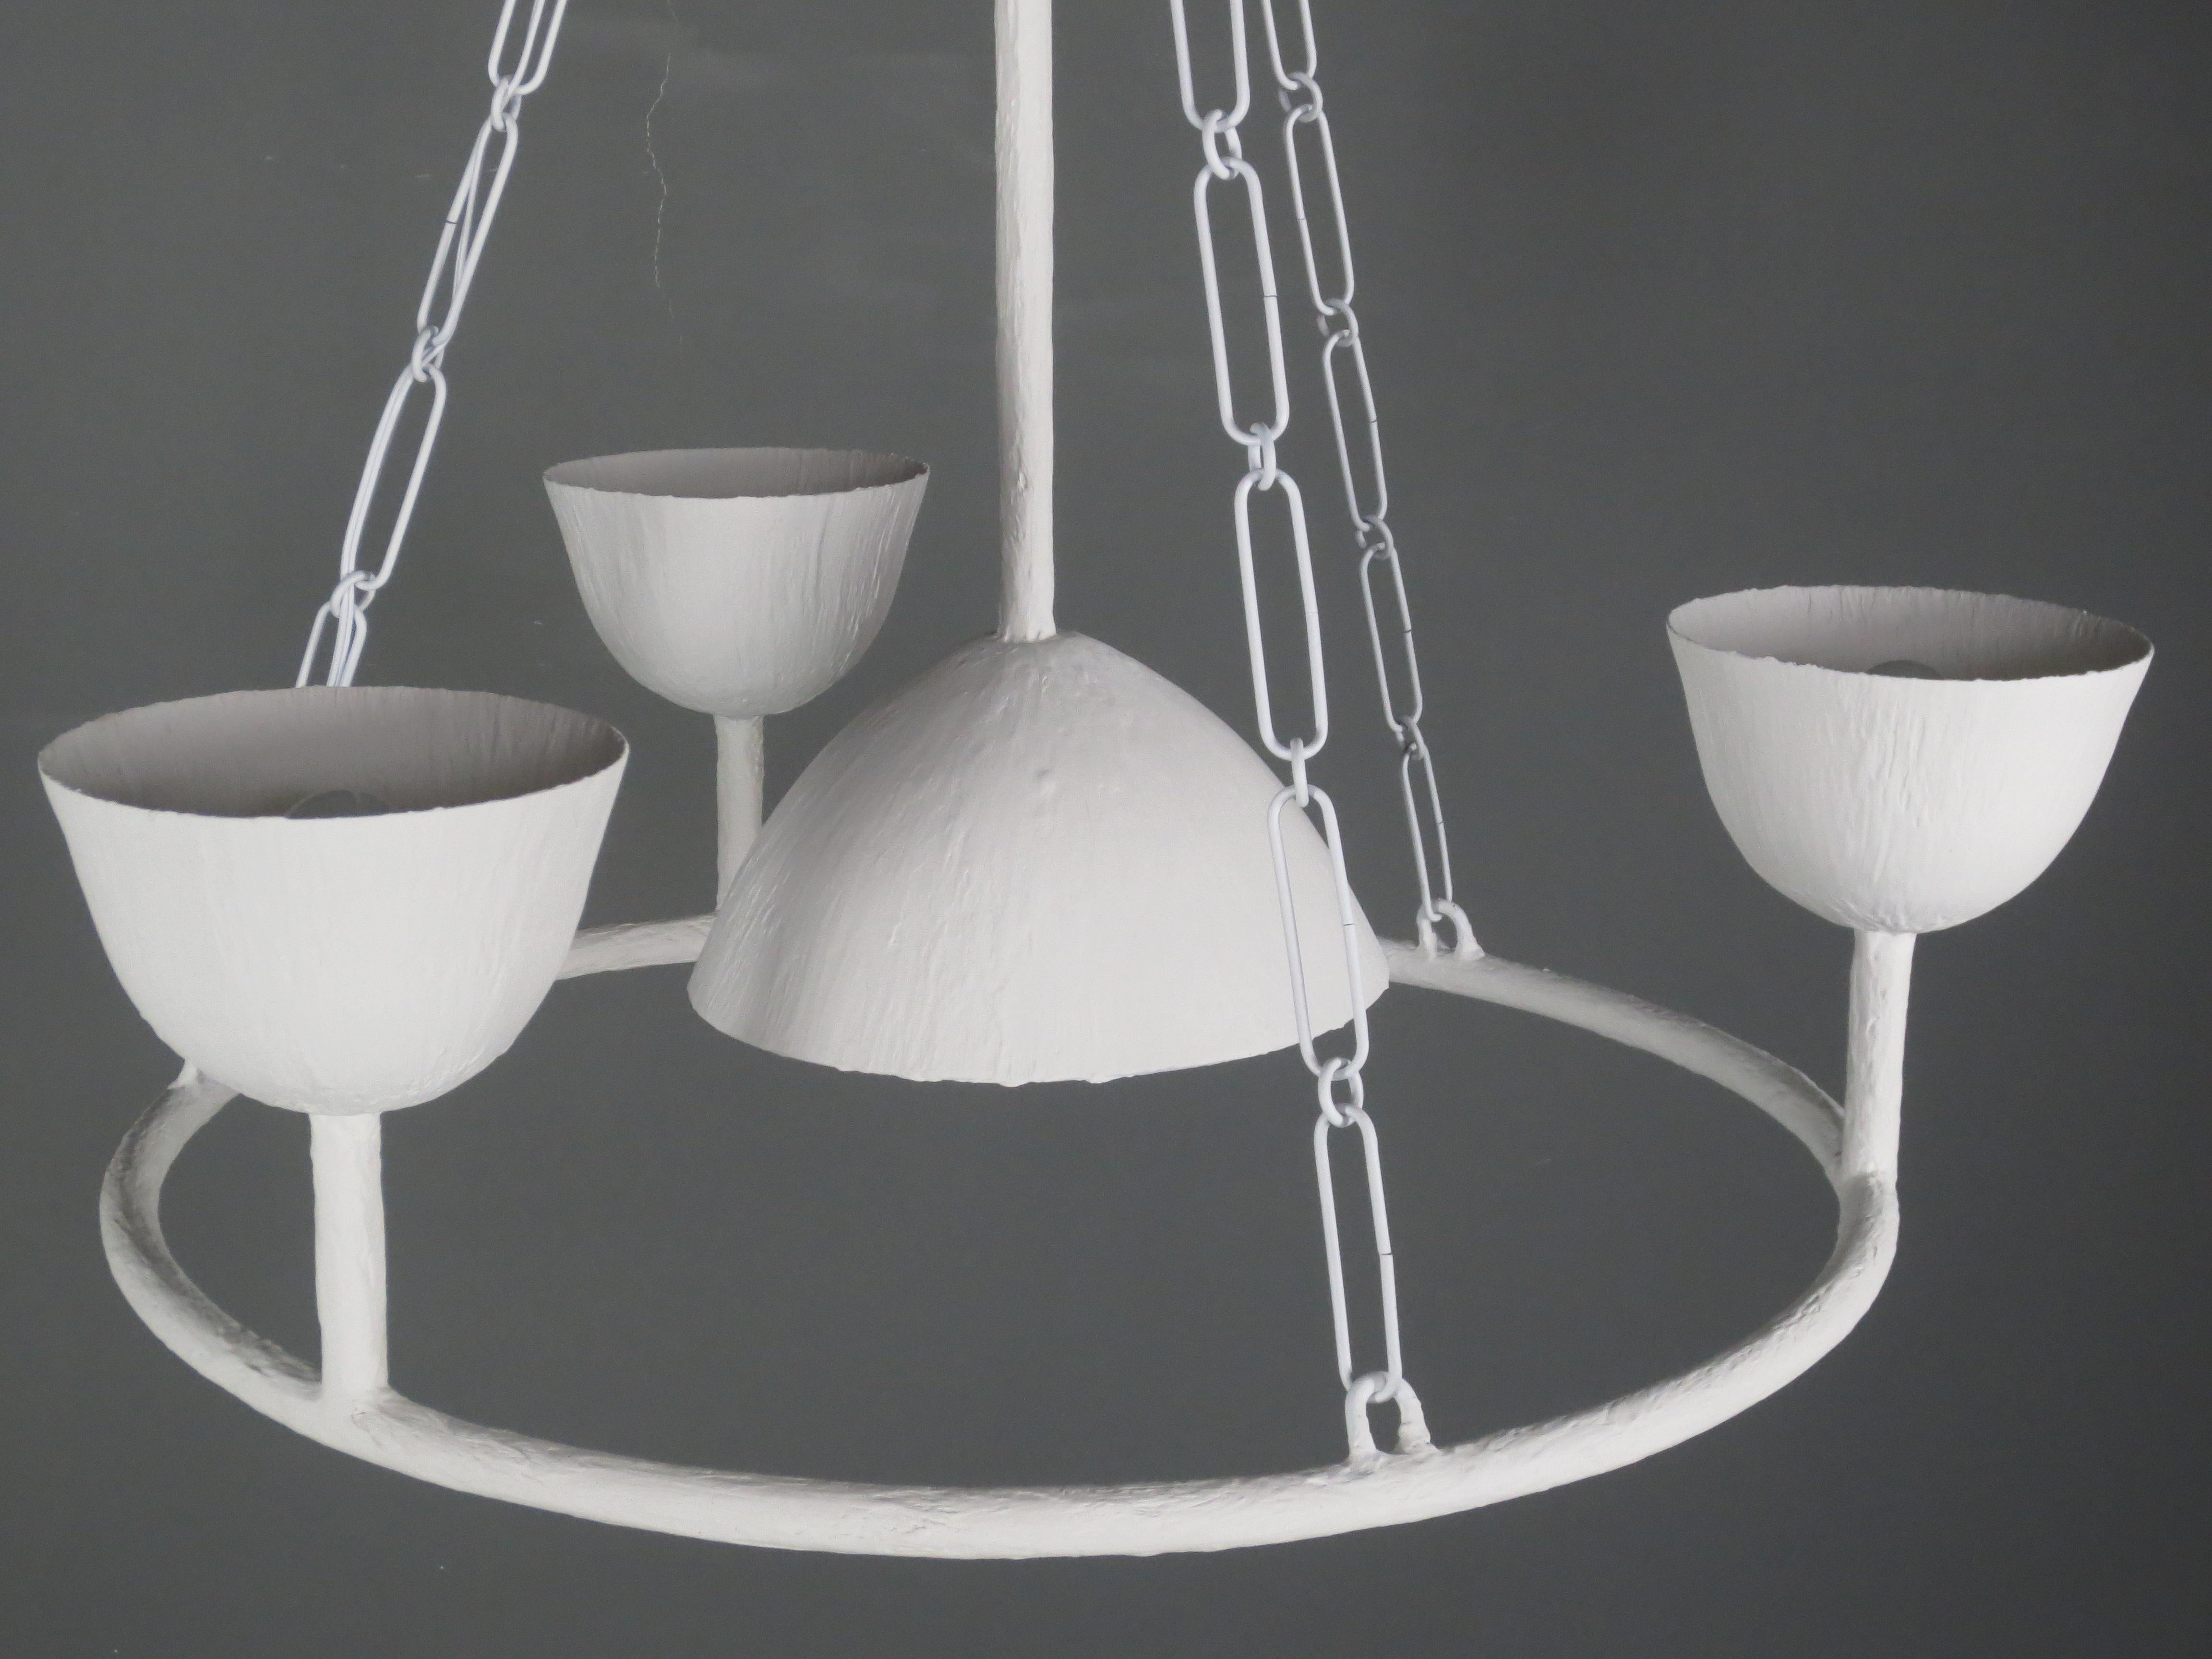 Circle of 4 Cups Plaster Chandelier by Tracey Garet of Apsara Interior Design.
Elegant Circle of 4 cups with each cup containing a candelabra light.  Three of the cups face up with a central cup facing down through the circle. The chandelier can